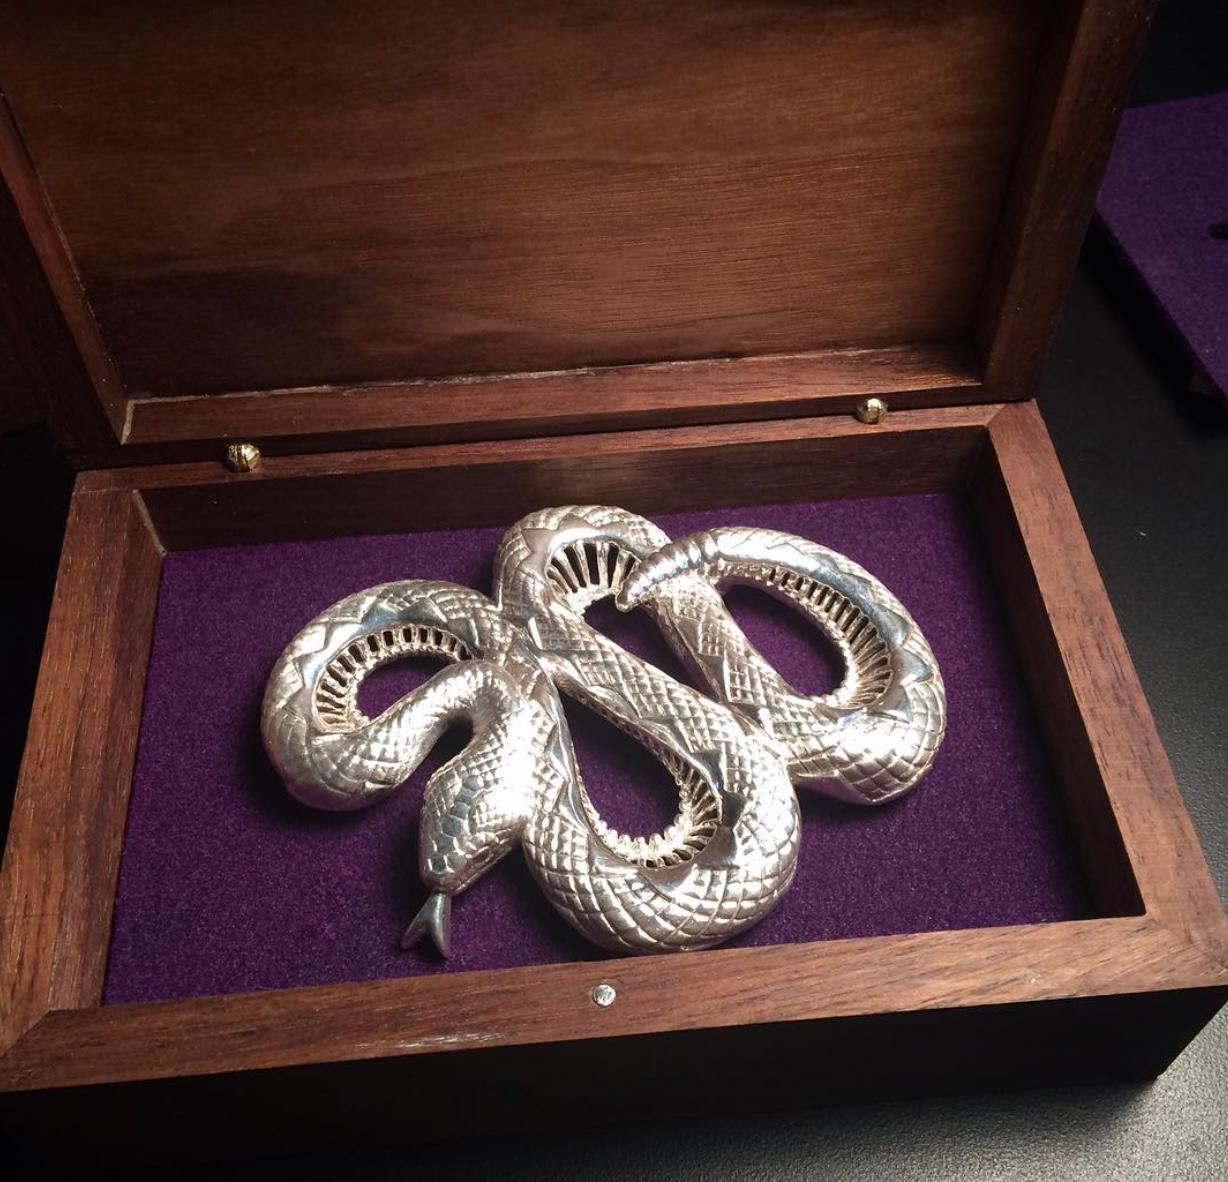 Large Sterling Silver Rattlesnake Belt Buckle by Ellie Thompson
Limited to an edition of just 25 buckles, each sterling silver buckle is signed and numbered. The snake is fully featured with open spoke work on the inside edges. Hinged loop holds up